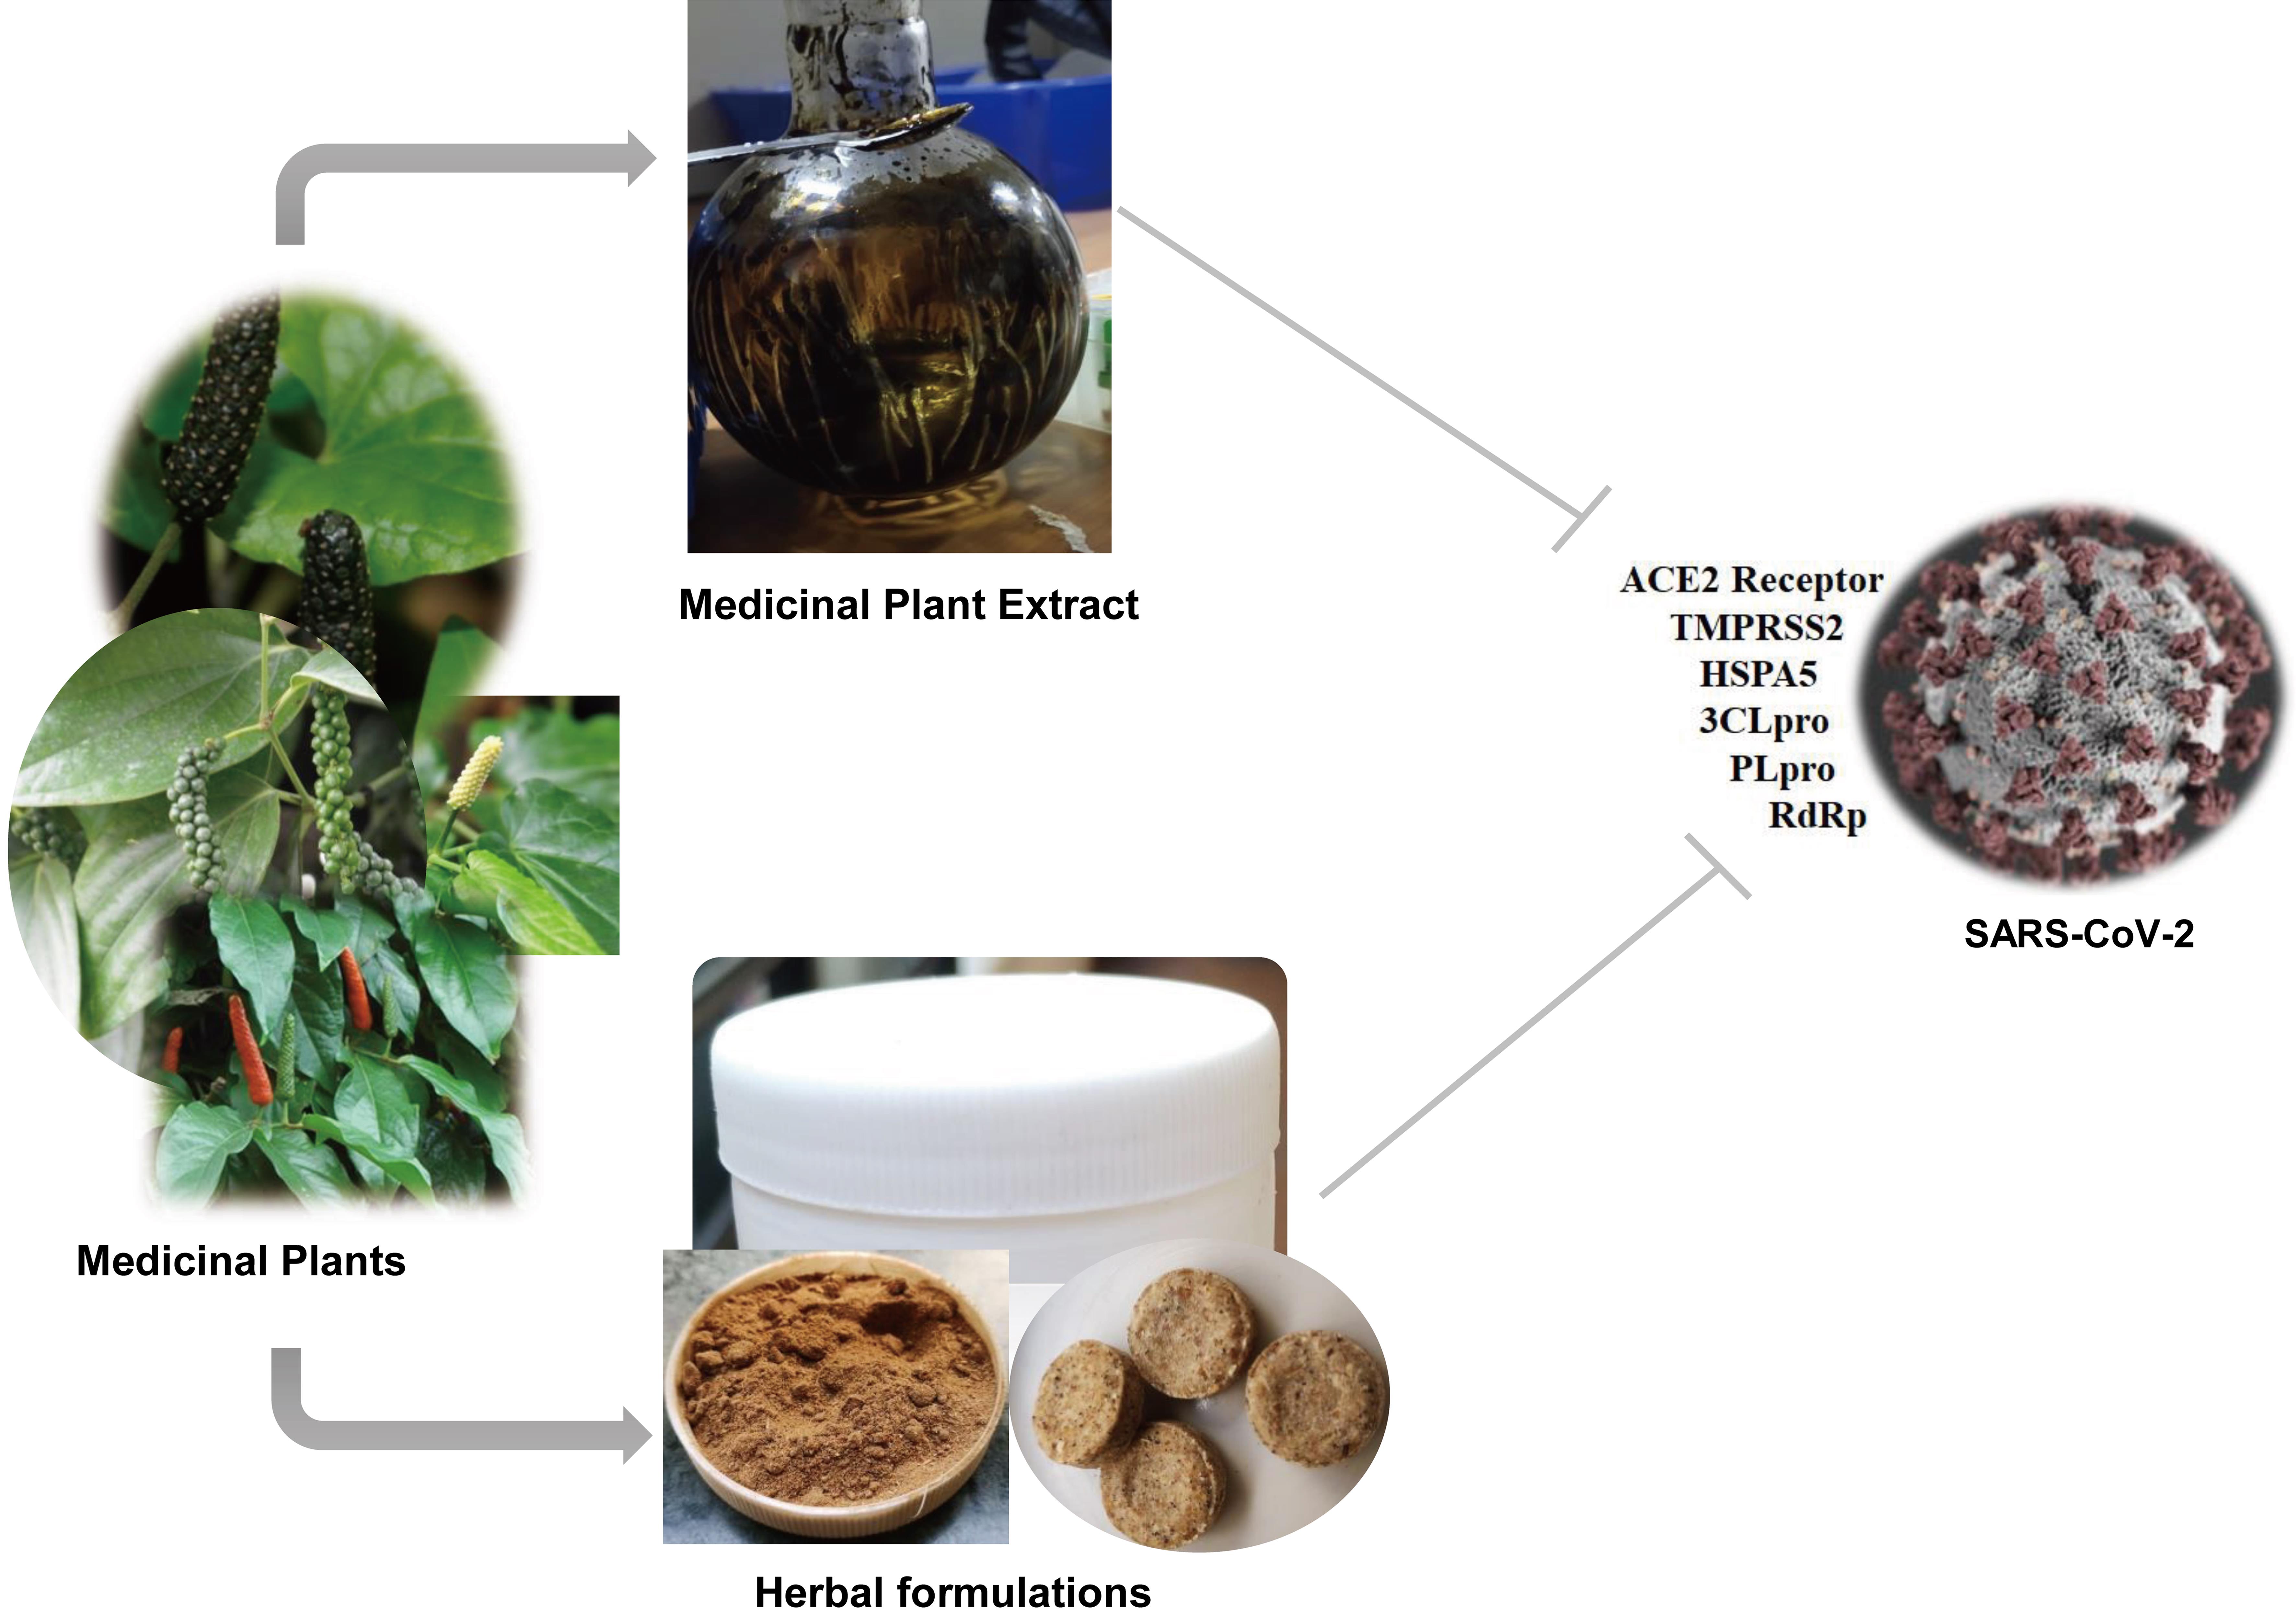 Schematic representation of medicinal plant interventions and their possible targets to prevent COVID-19.